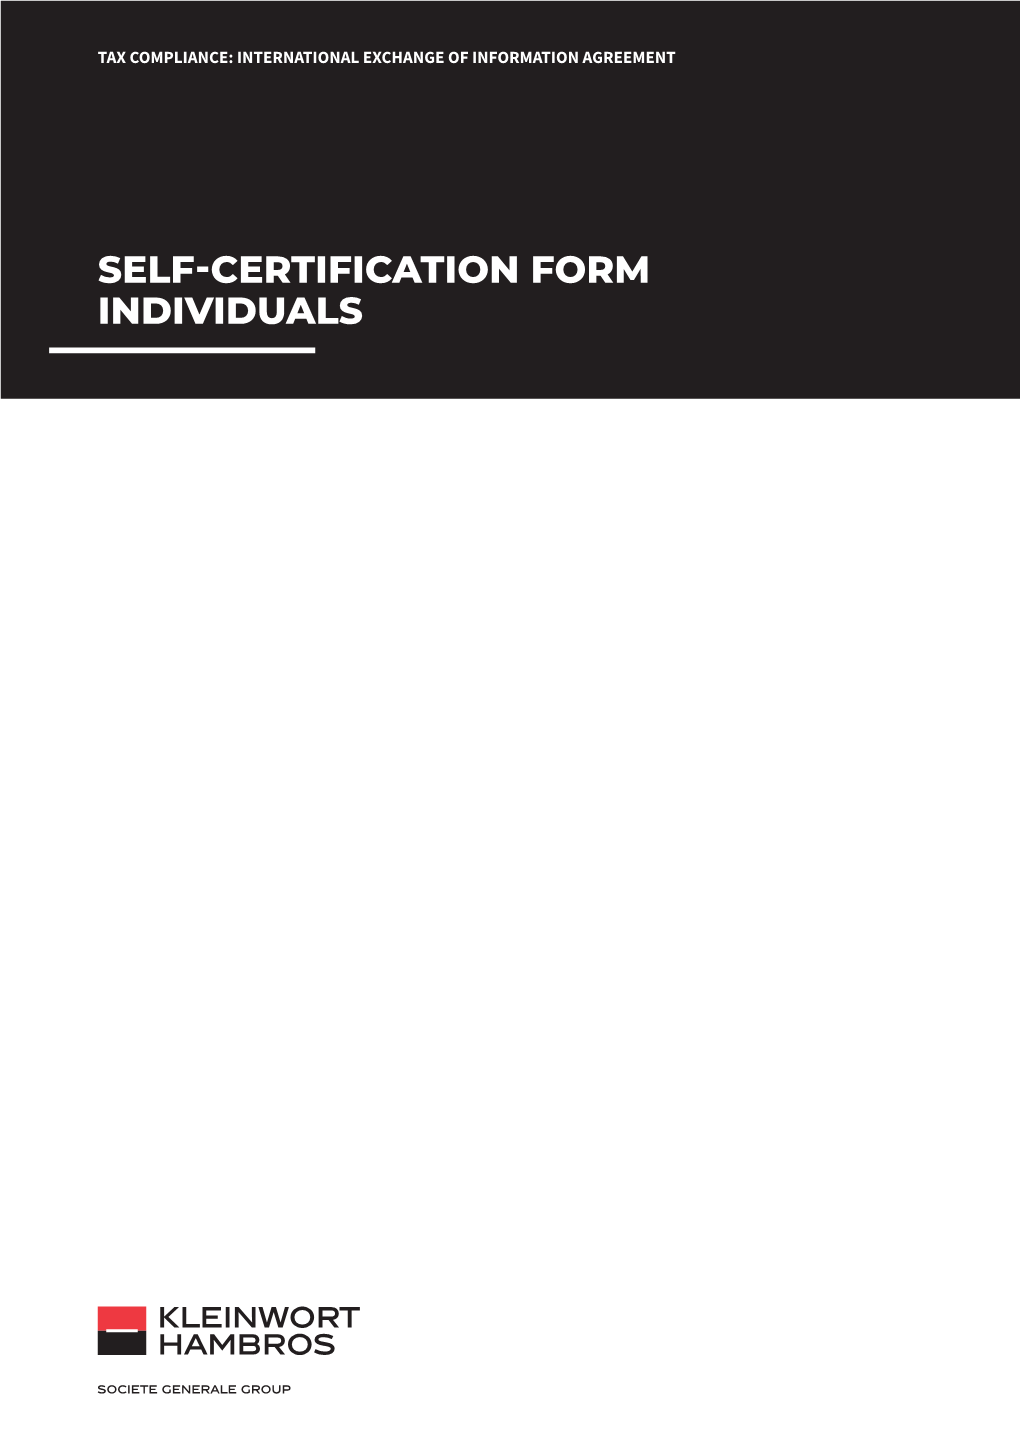 Self-Certification Form Individuals Document Guide